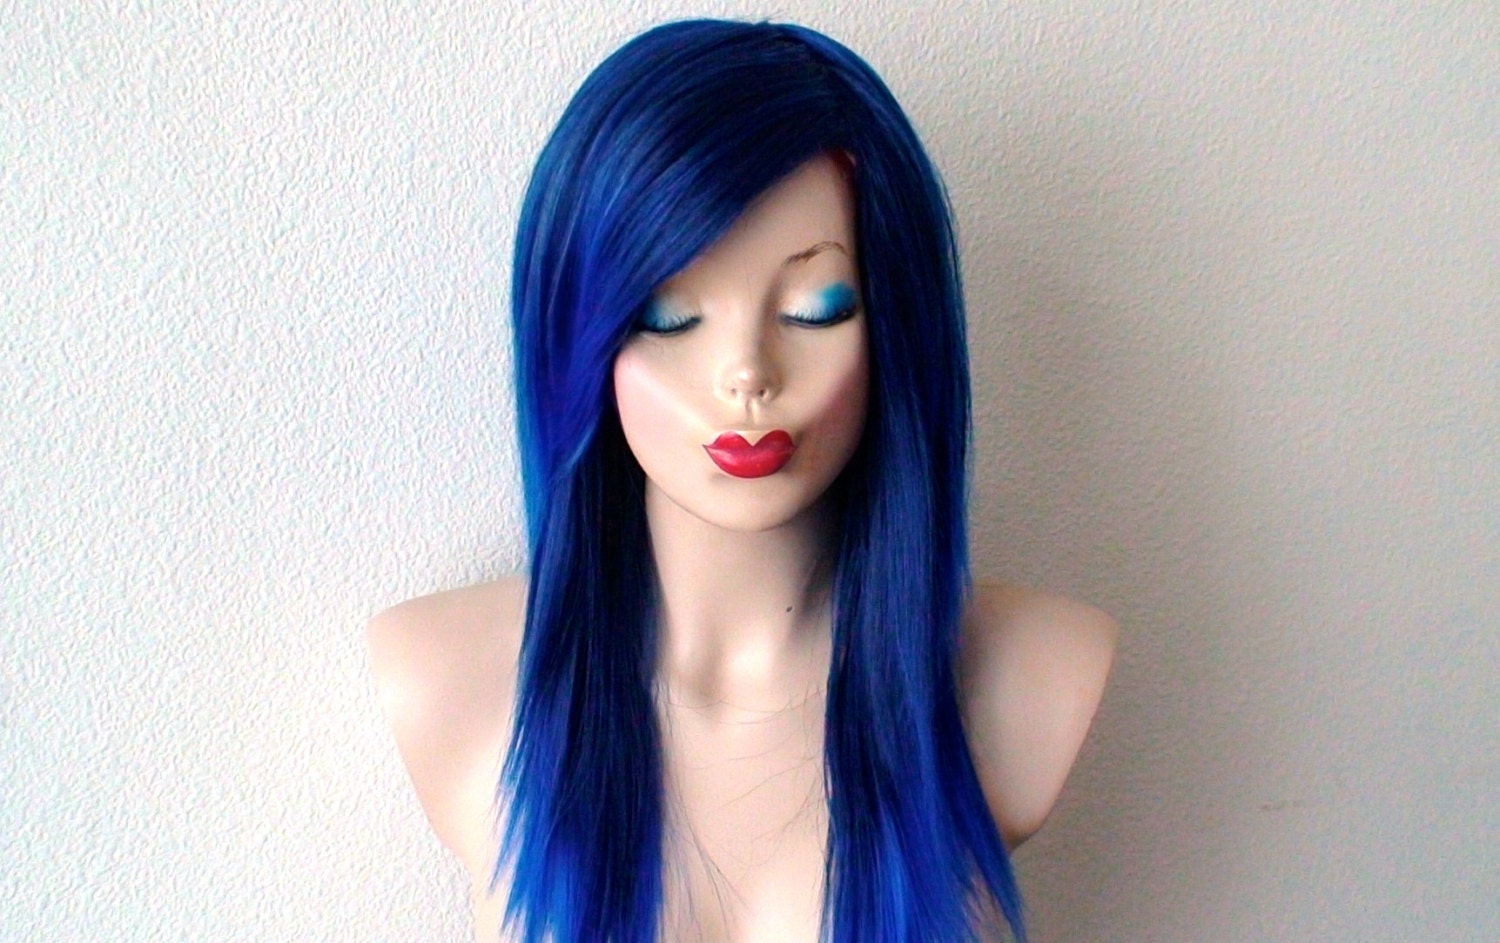 2. "Baby Blue Ombre Wig" - wide 9